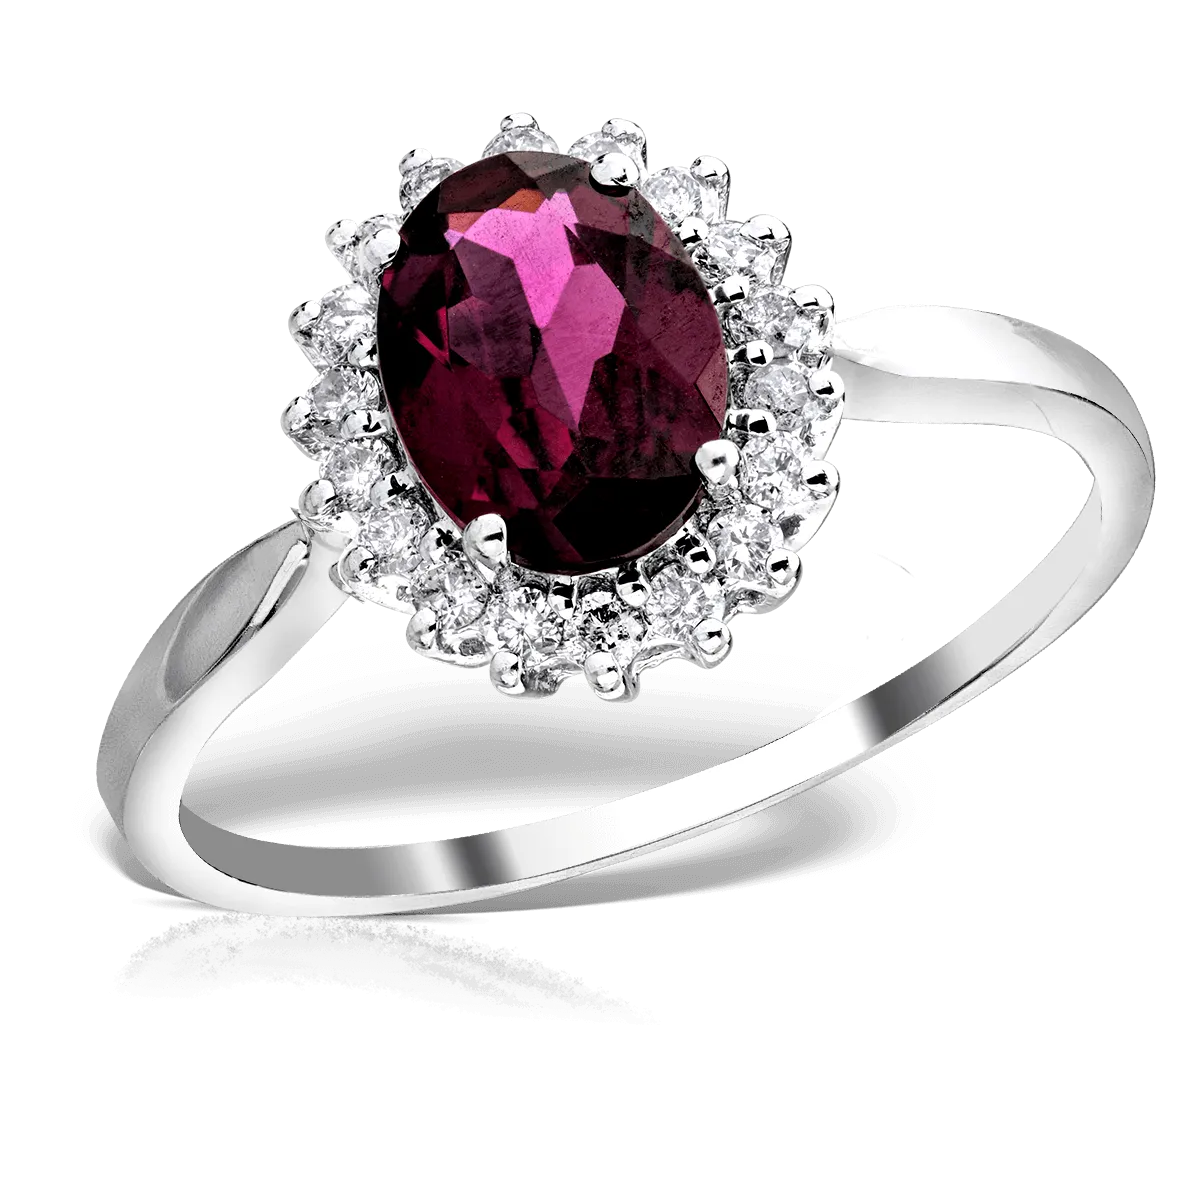 14K white gold ring with 1.23ct rhodolite and 0.21ct diamonds